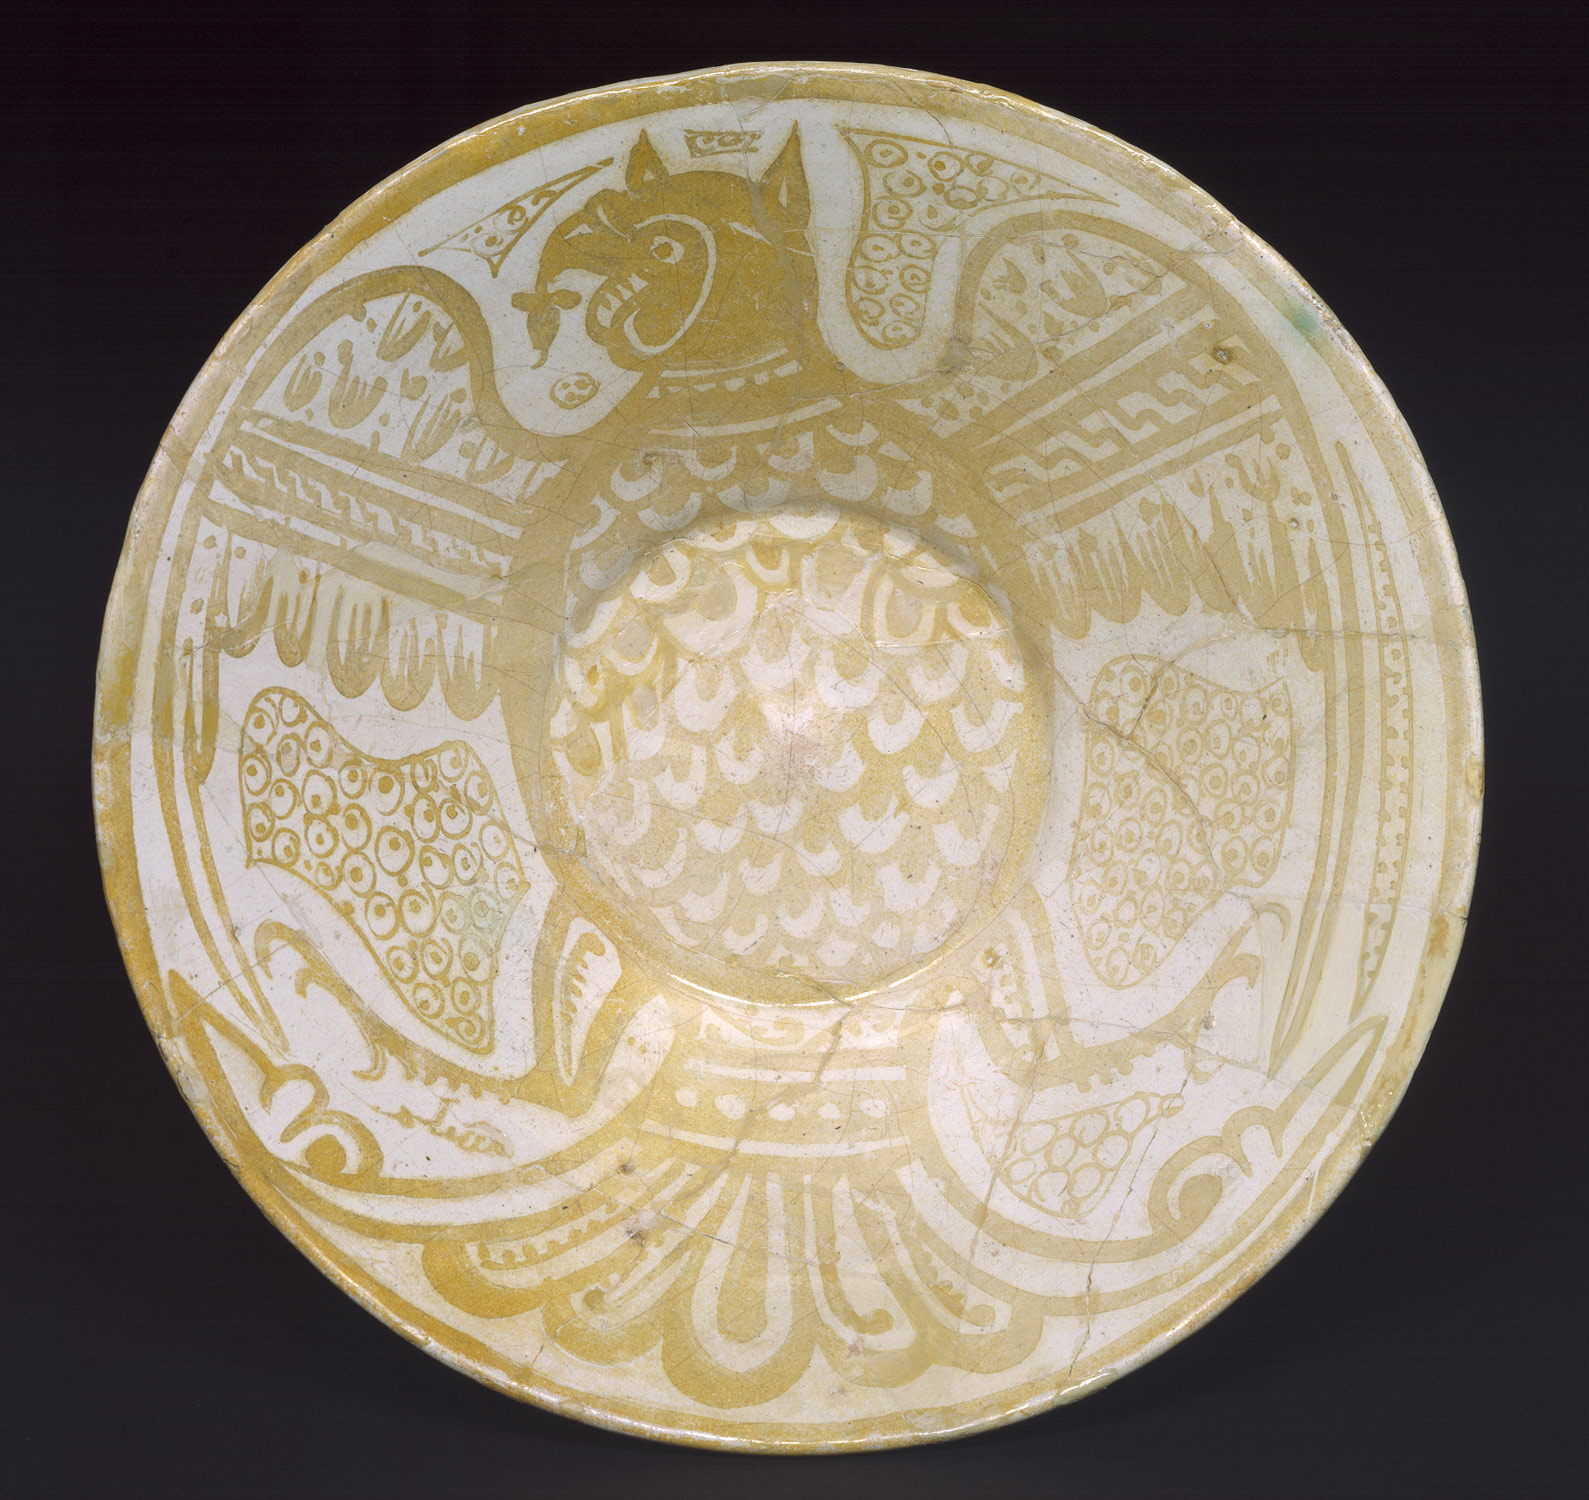 Bowl with Eagle